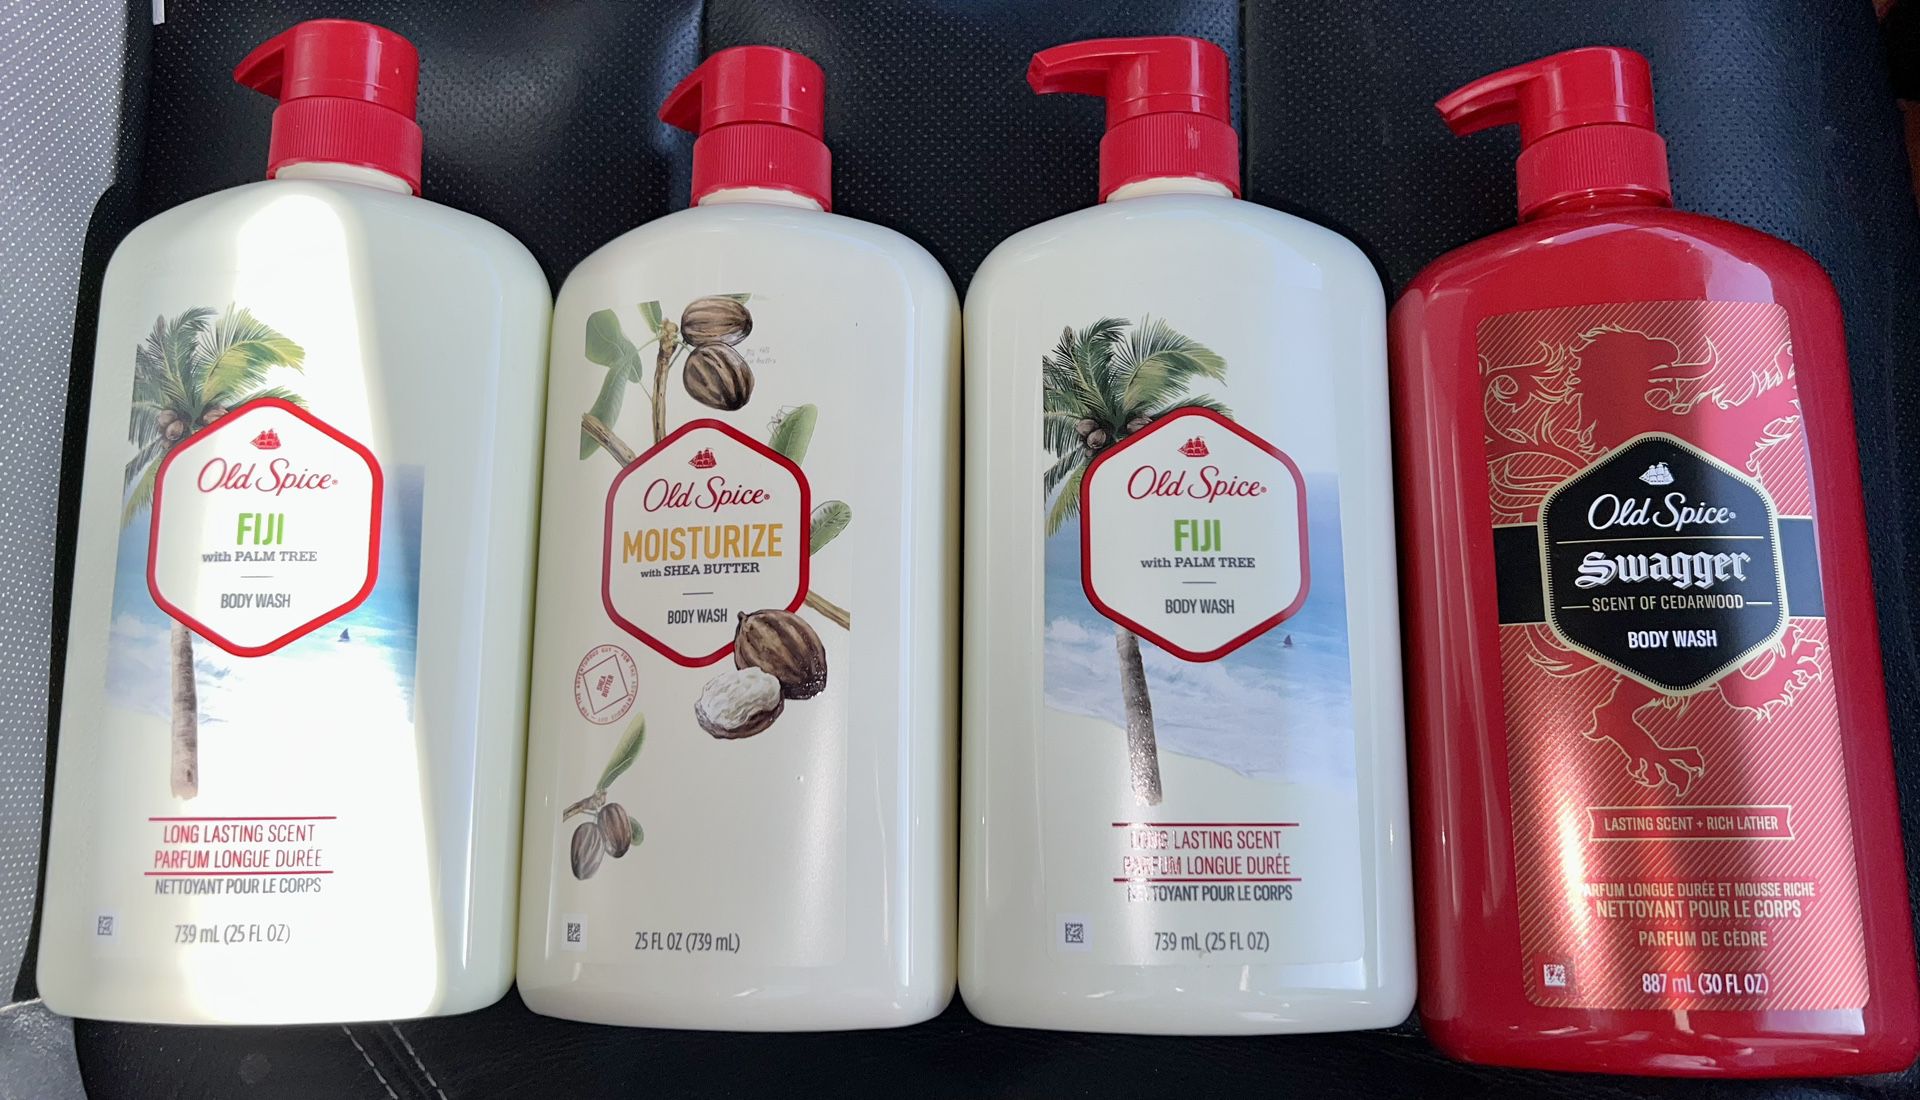 4 bottles of Old Spice mixed Fuji, Moisturize 25oz and Swagger Body wash 30oz